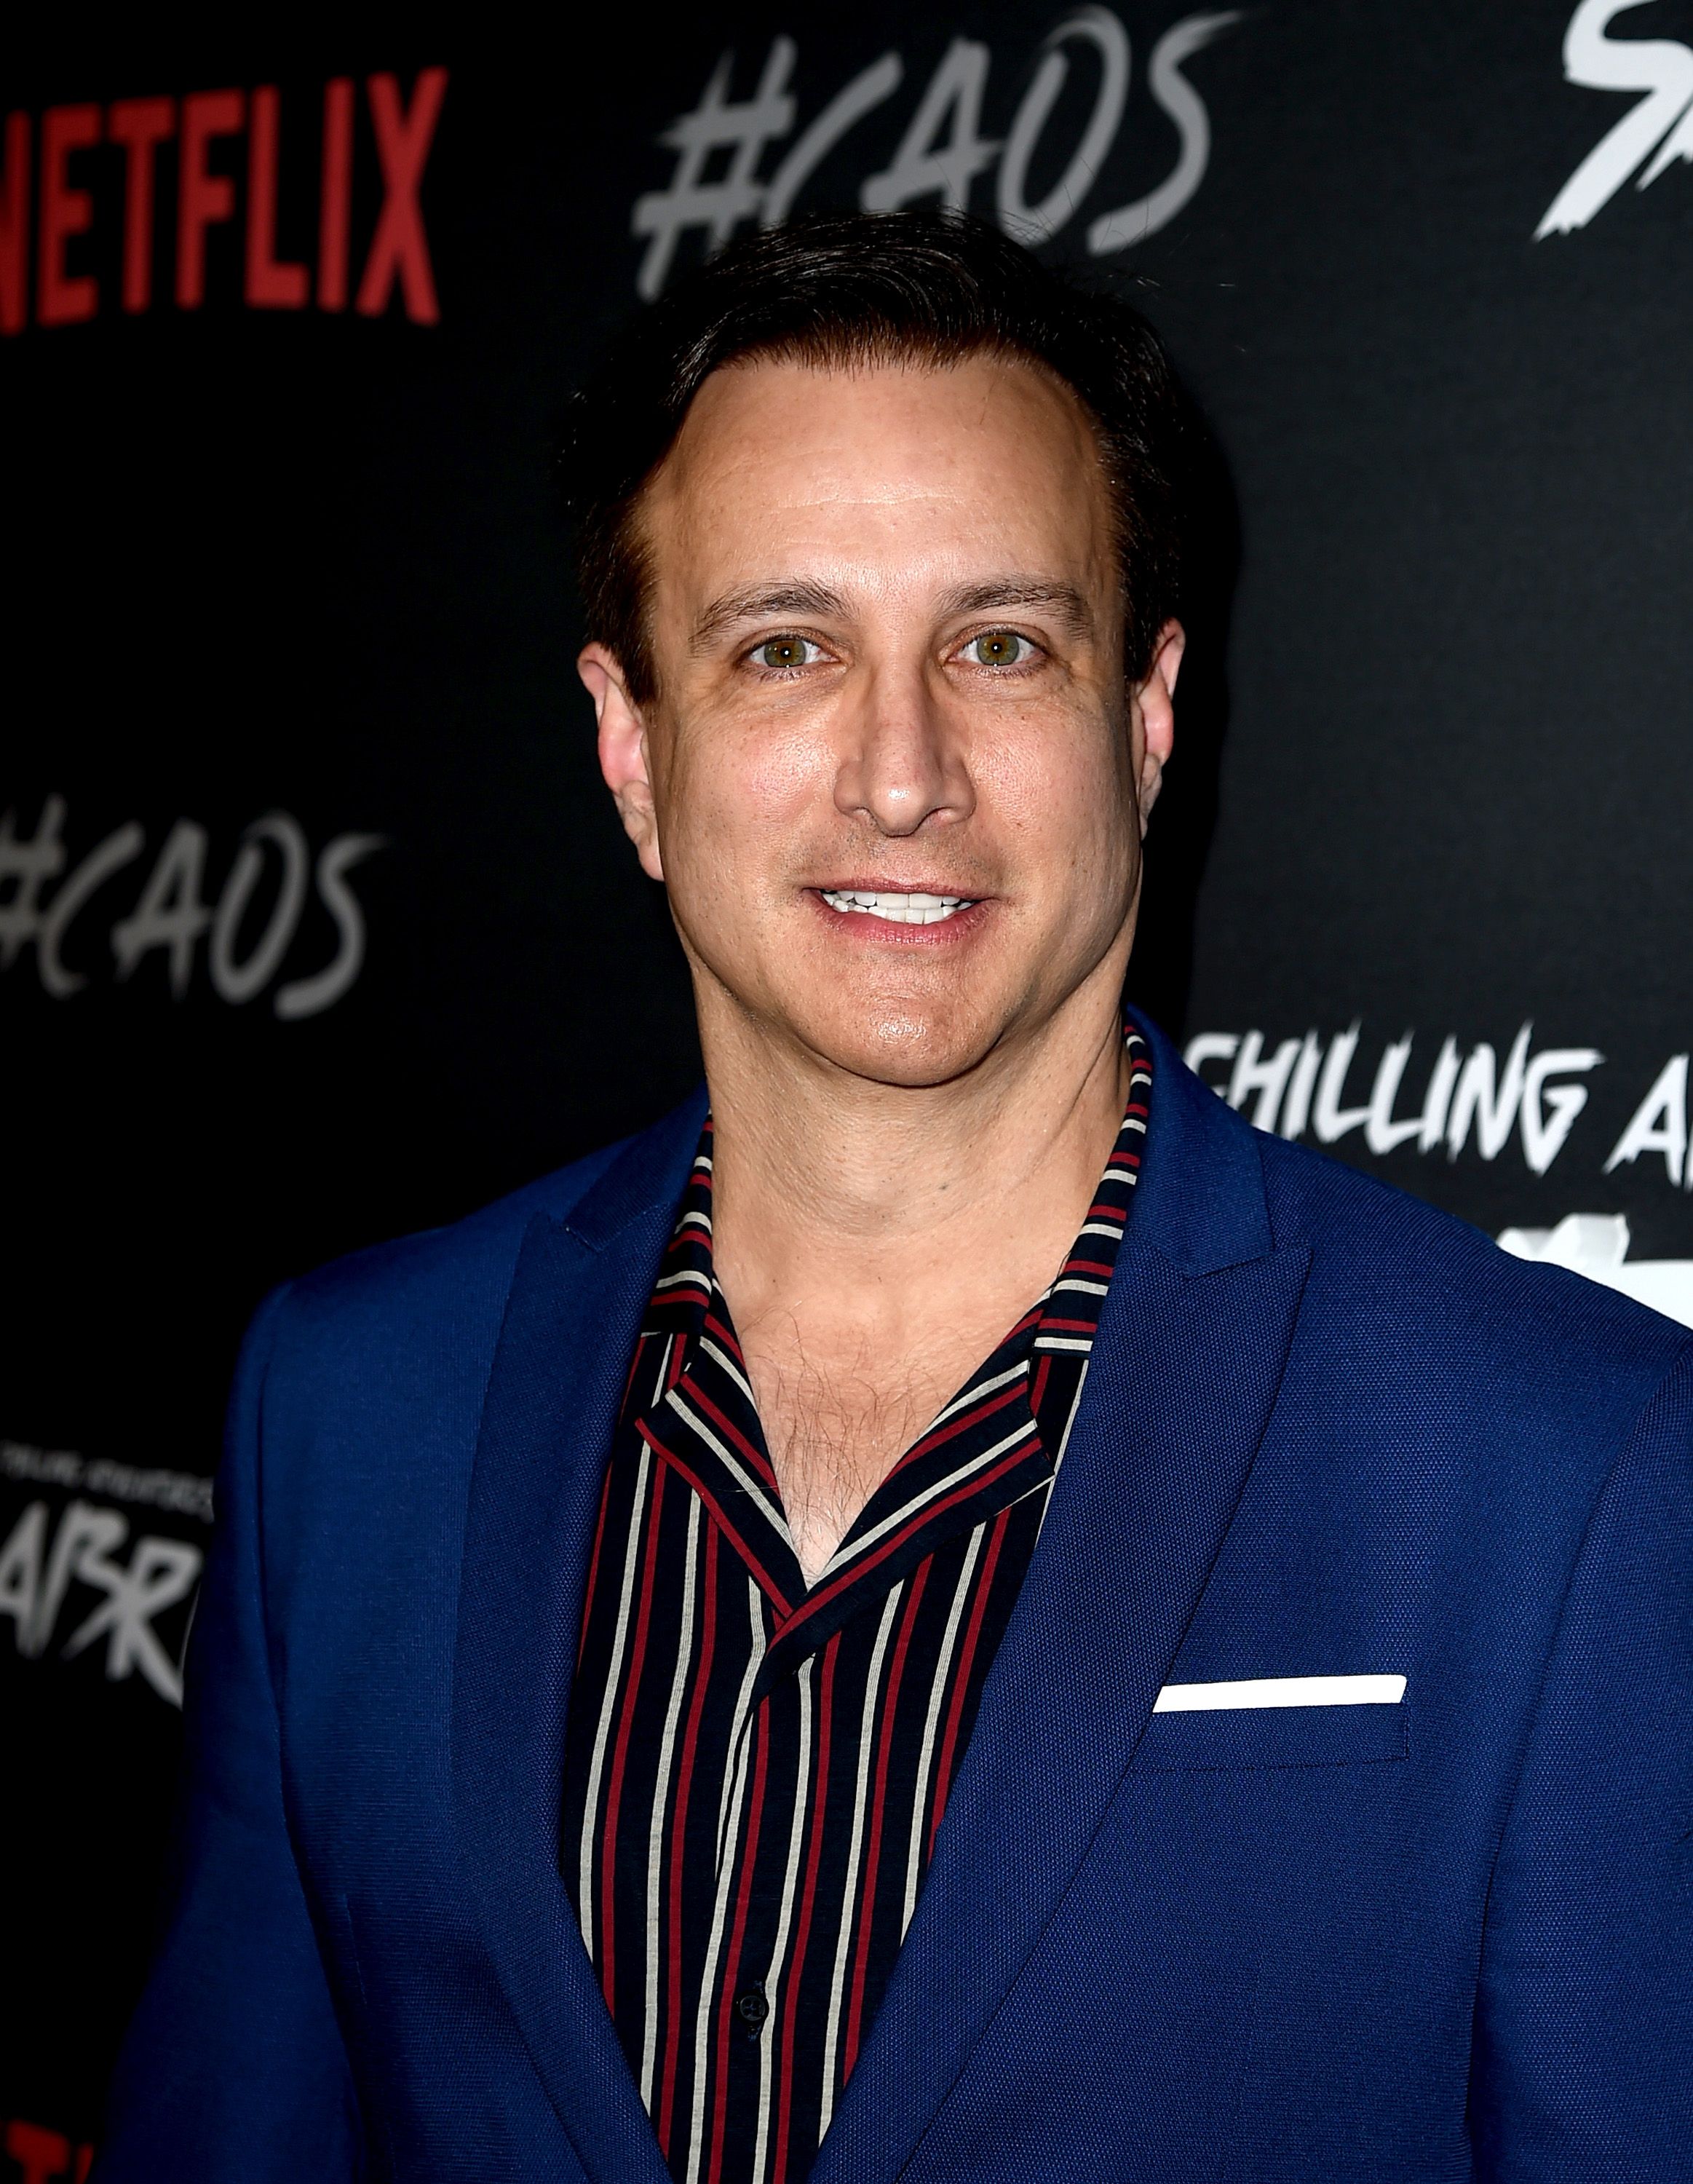 Bronson Pinchot at the premiere of Netflix's "Chilling Adventures Of Sabrina" at the Hollywood Athletic Club on October 19, 2018 in Los Angeles, California | Photo: Getty Images